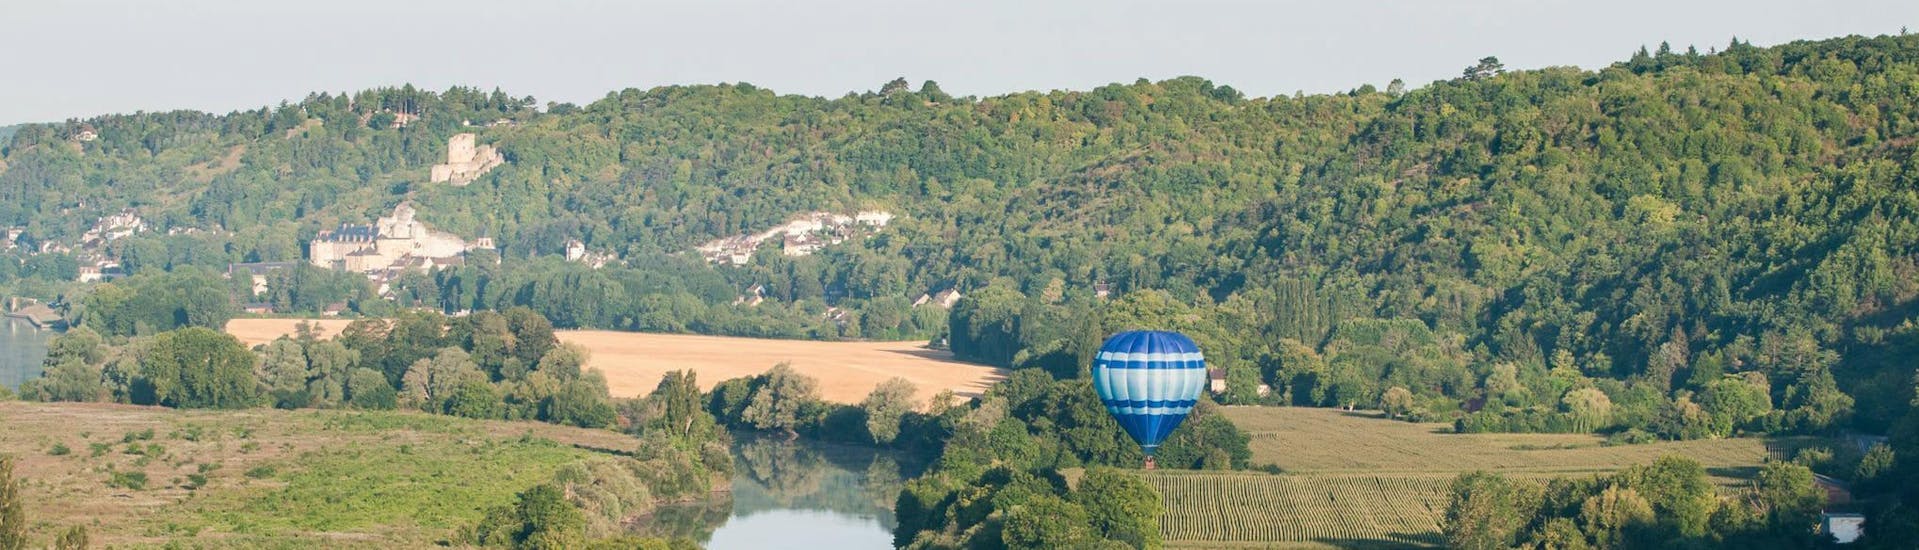 Balloon Ride in the Vexin Natural Park - West of Paris.